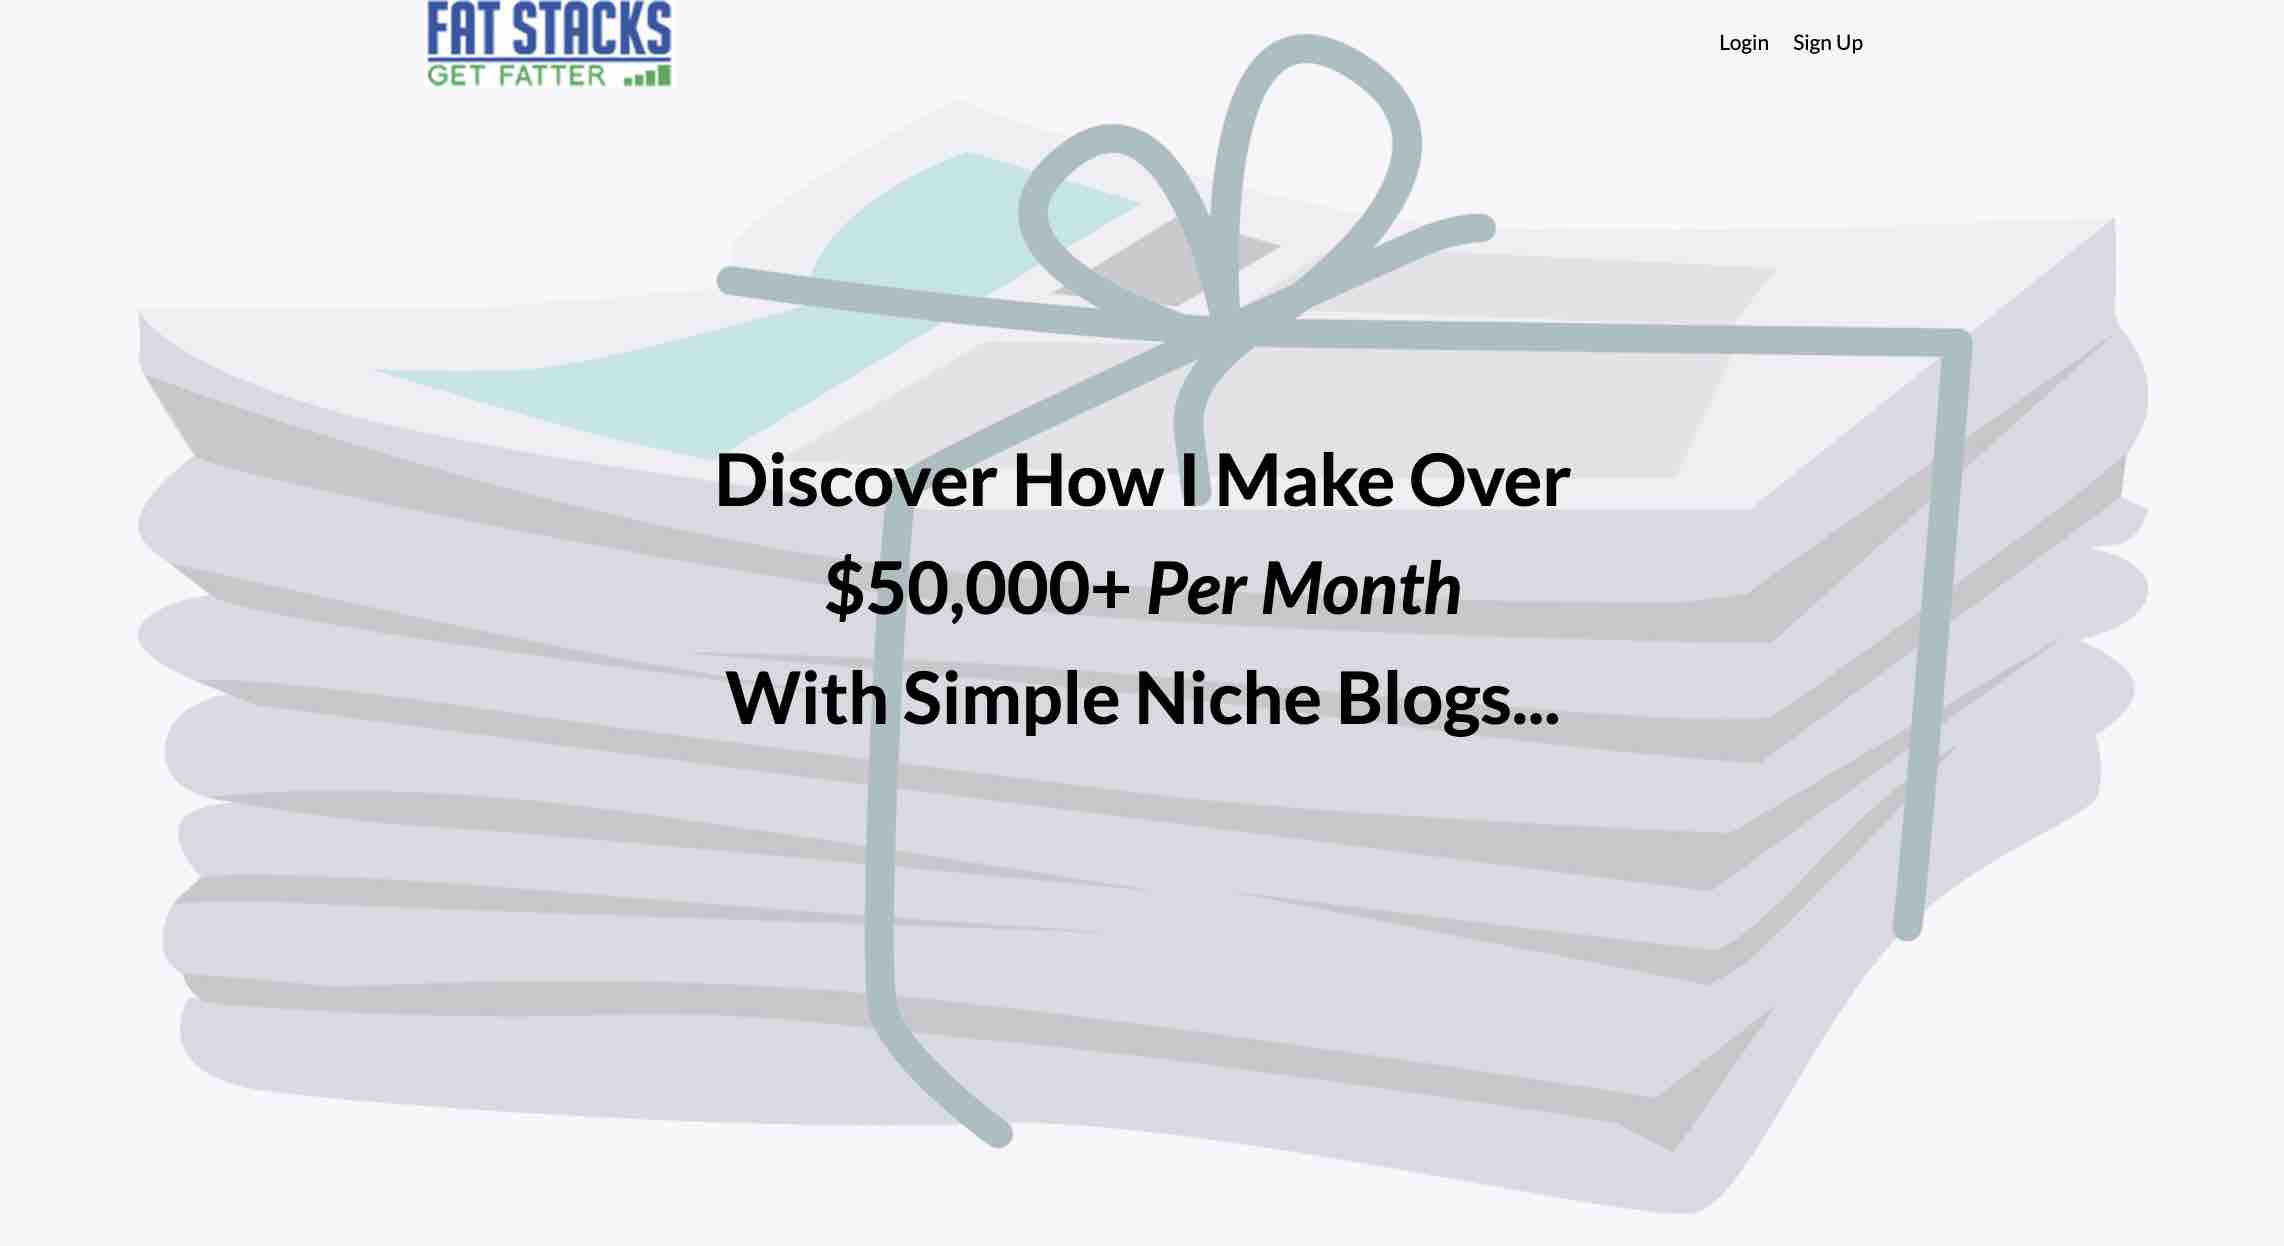 What is the Fat Stacks Bundle sales page